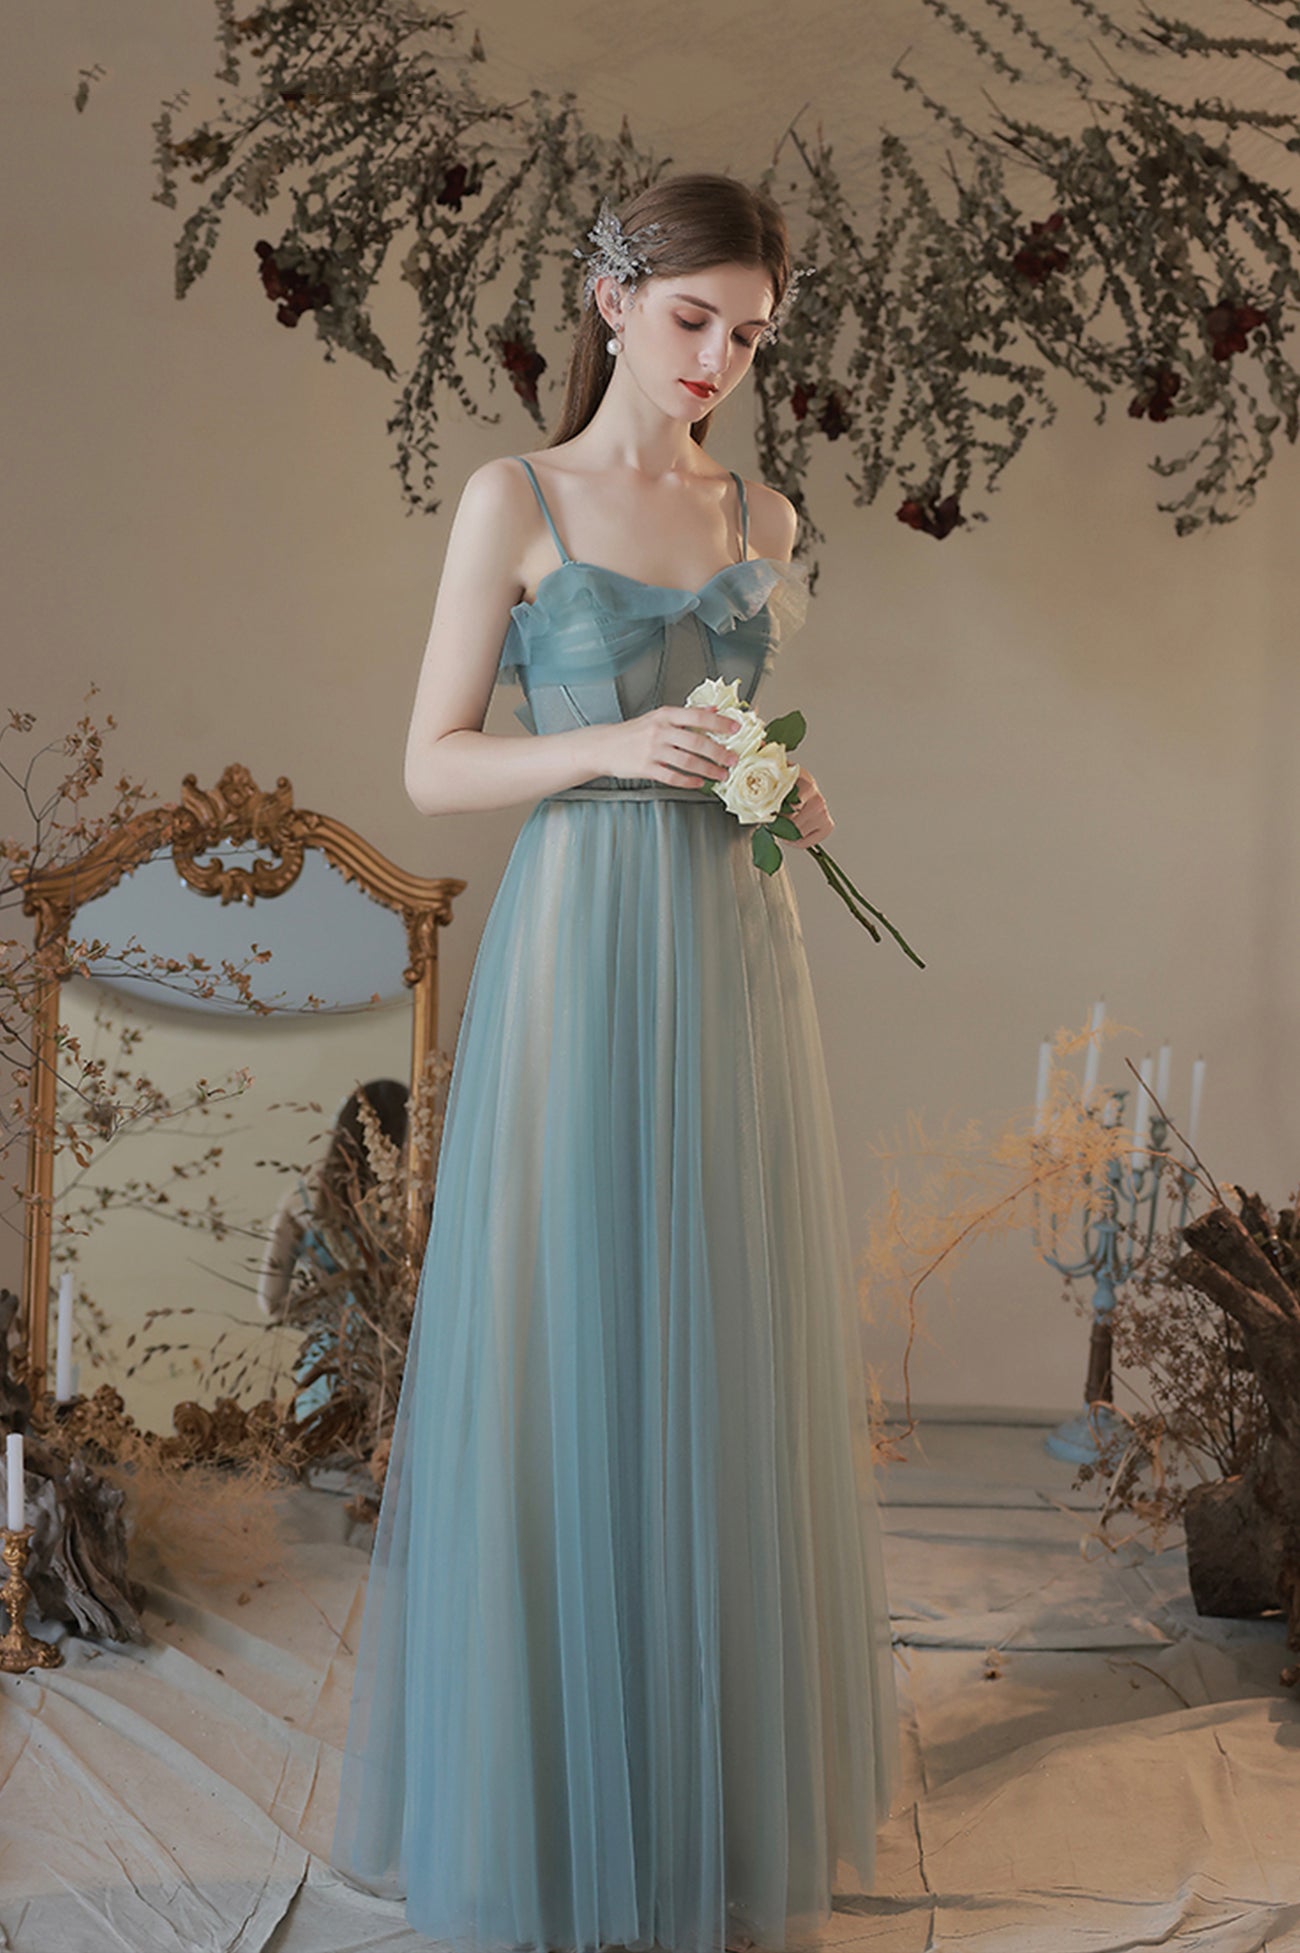 A-Line Tulle Long Prom Dress, Simple Spaghetti Strap Evening Dress